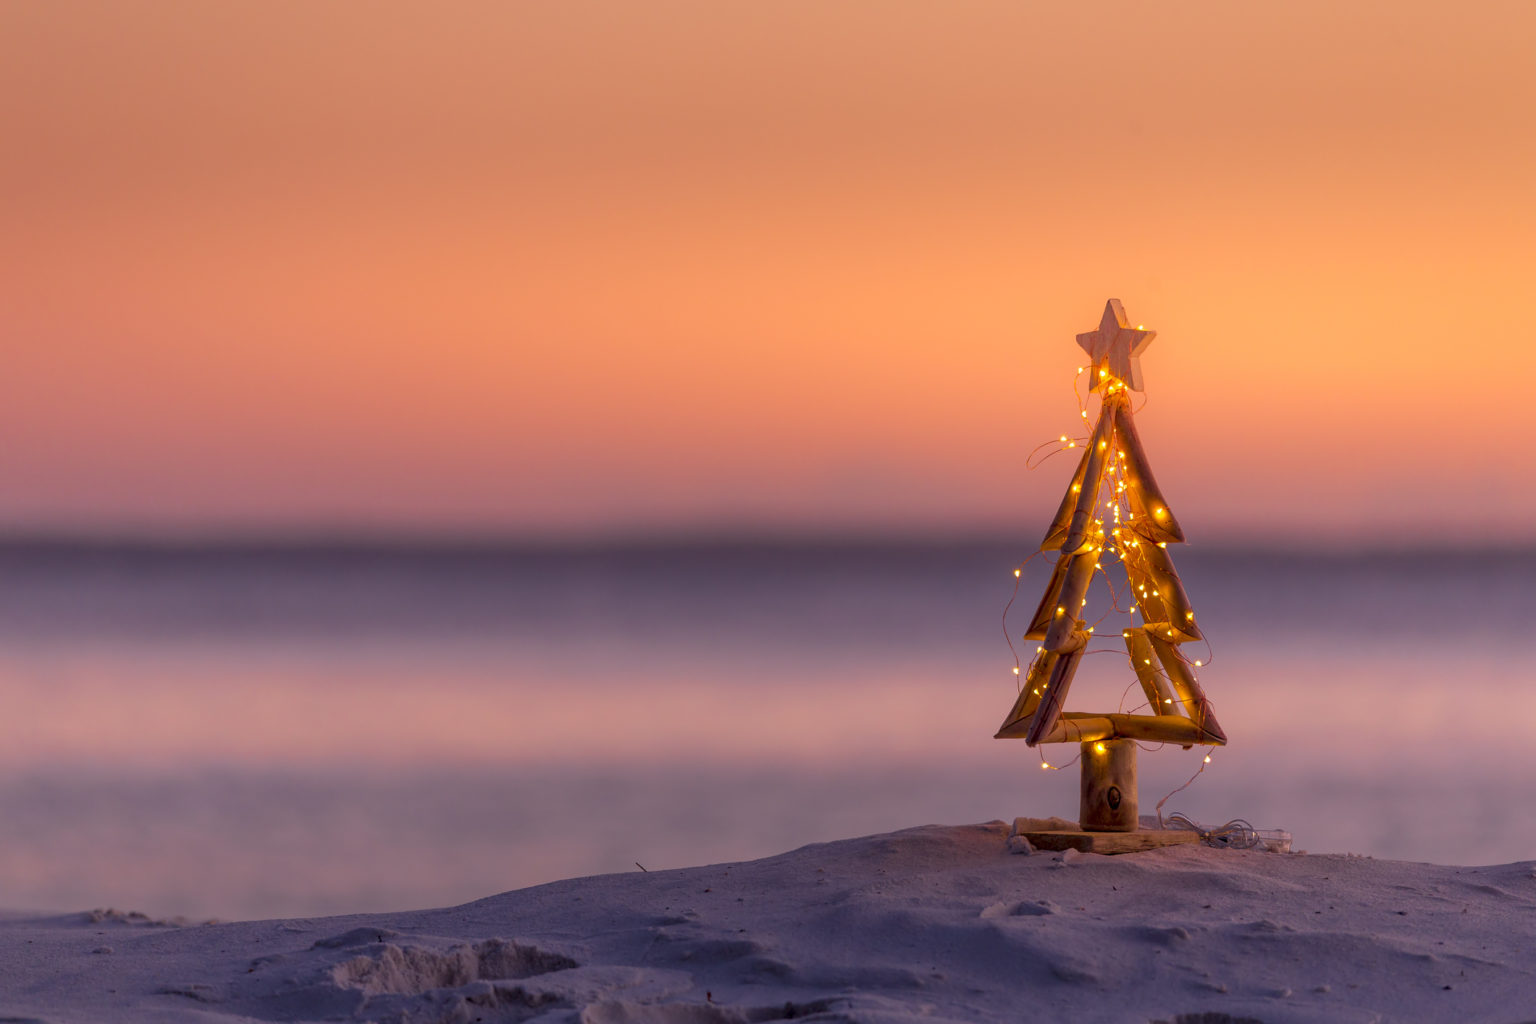 A small Christmas tree on the beach, nothing like the awesome christmas lights you'll see in Myrtle Beach.